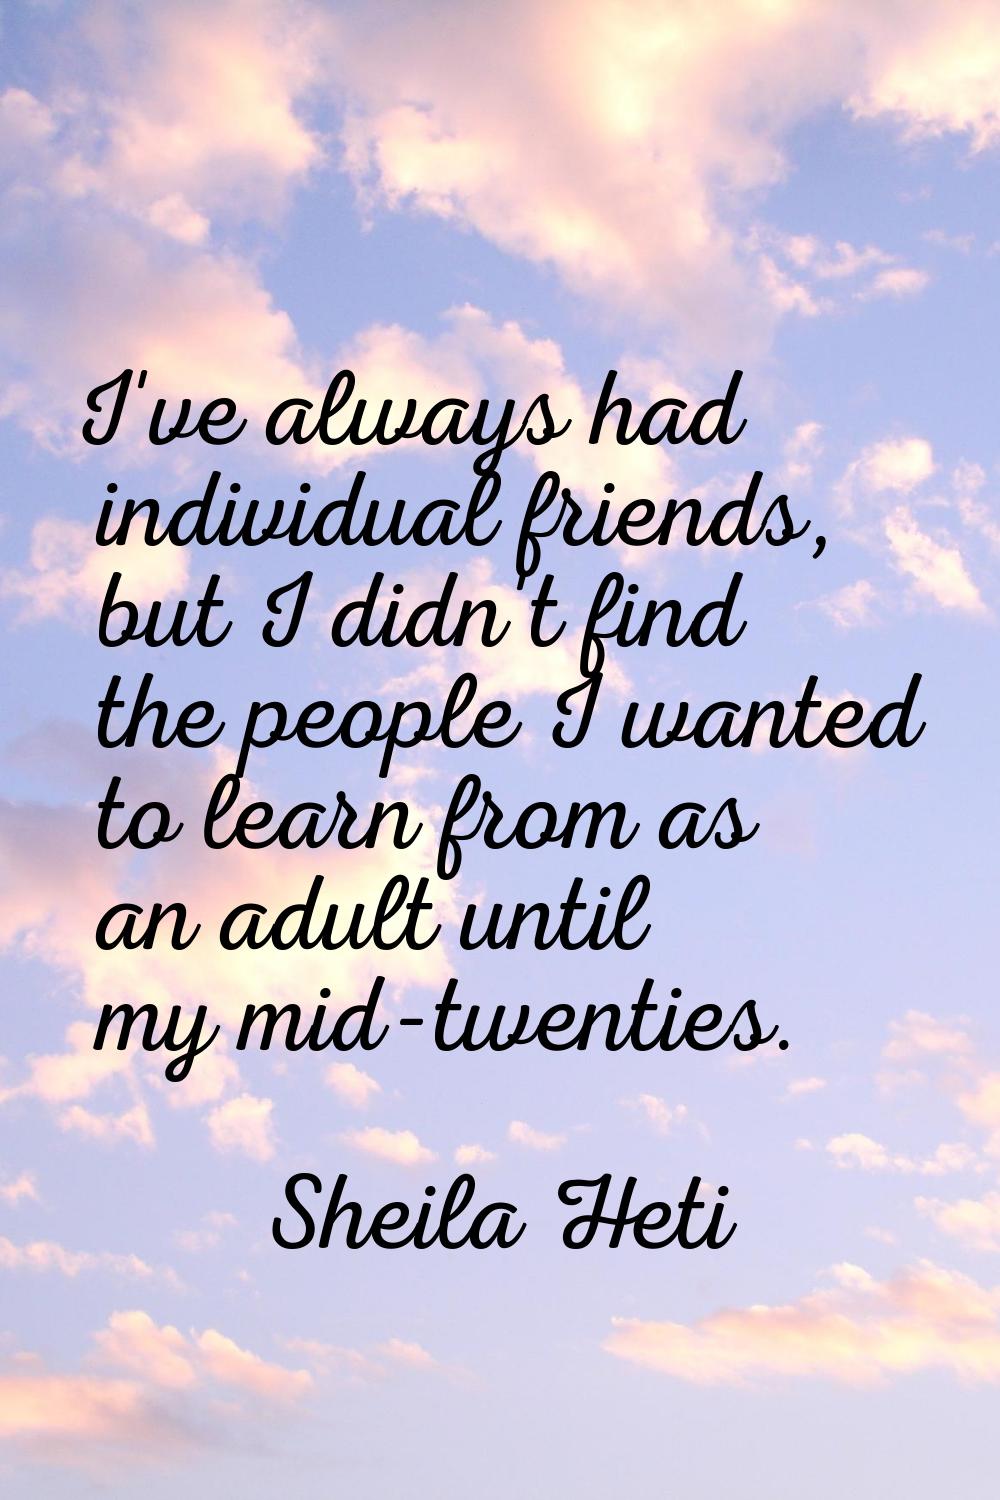 I've always had individual friends, but I didn't find the people I wanted to learn from as an adult